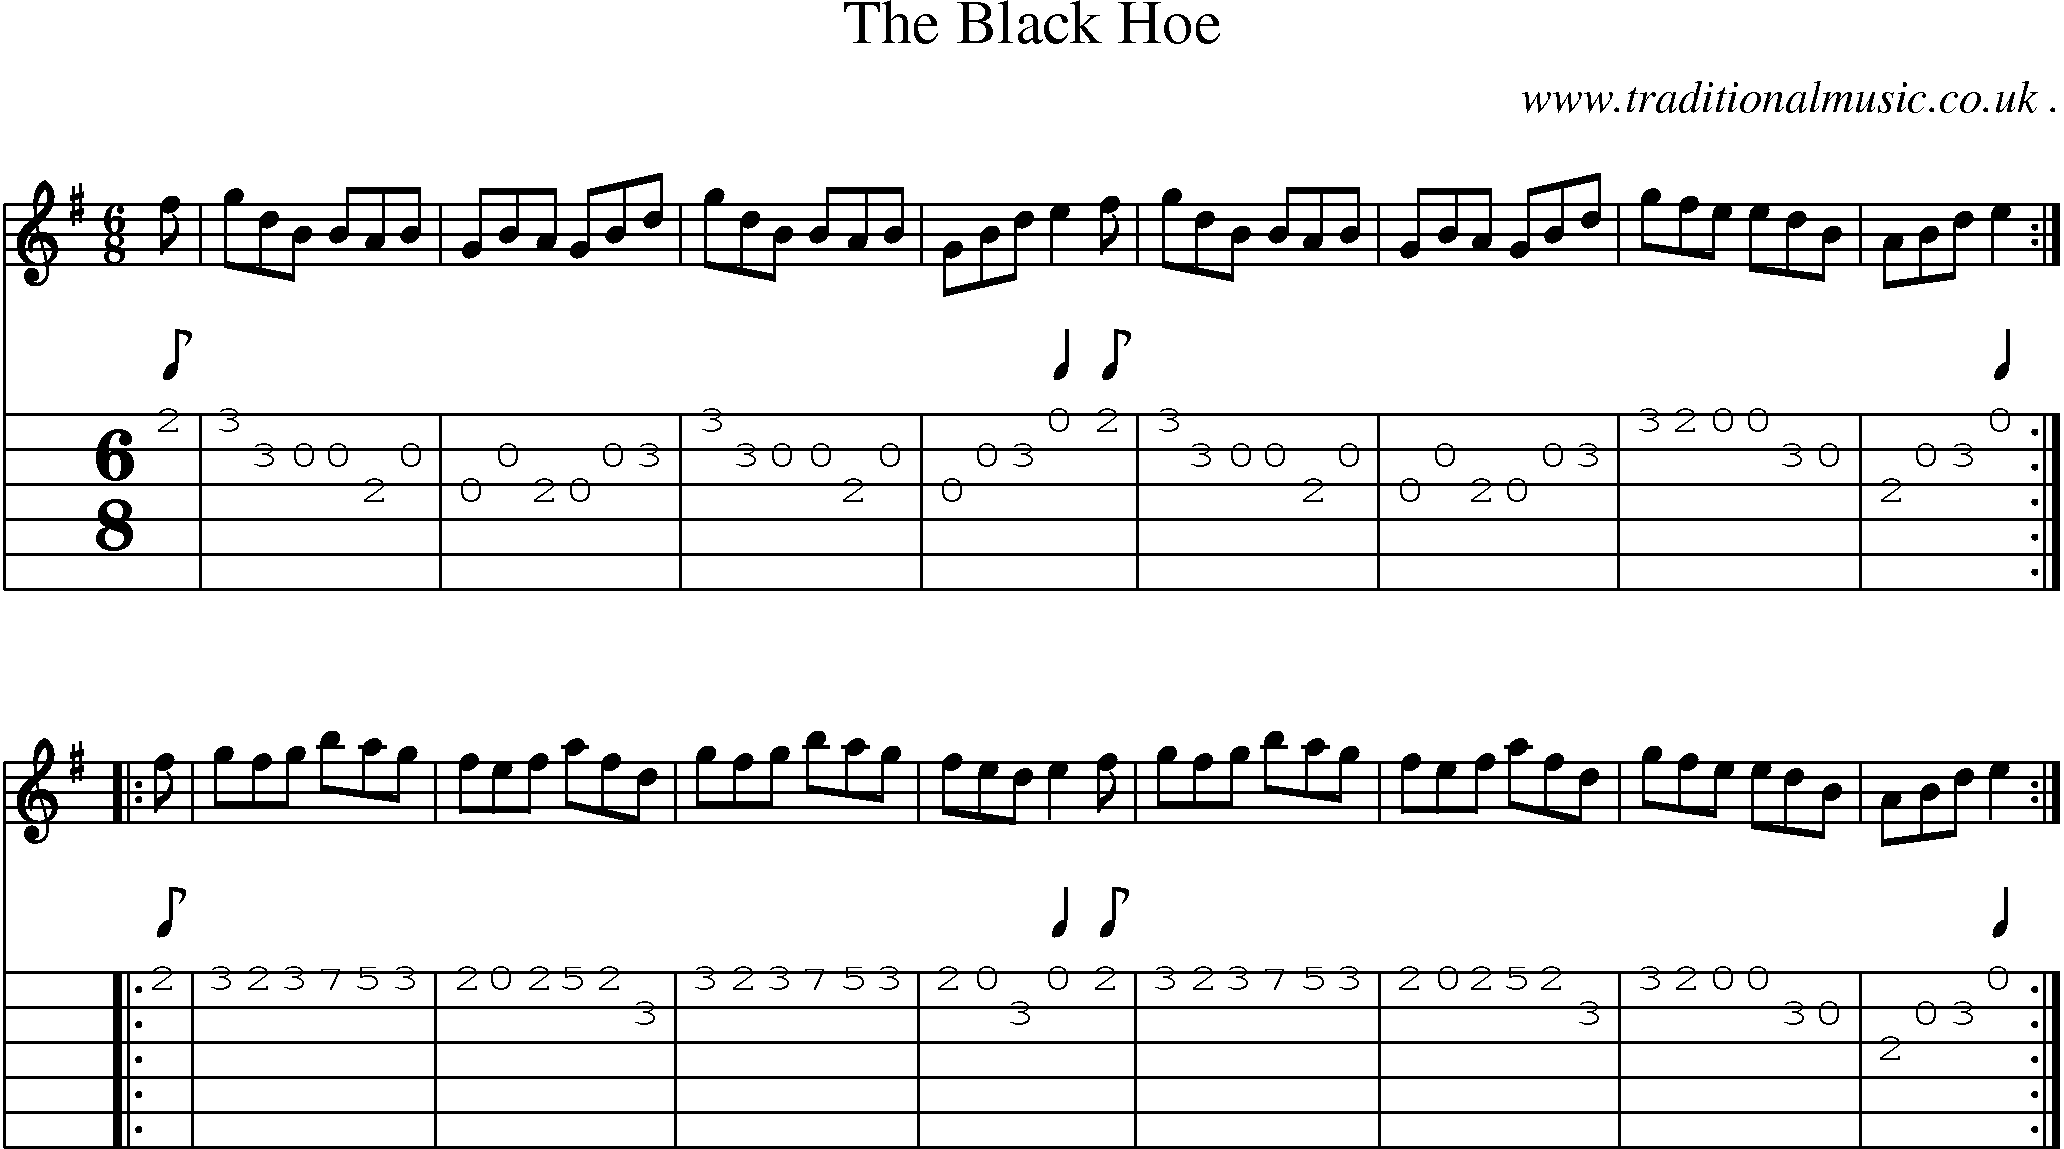 Sheet-music  score, Chords and Guitar Tabs for The Black Hoe